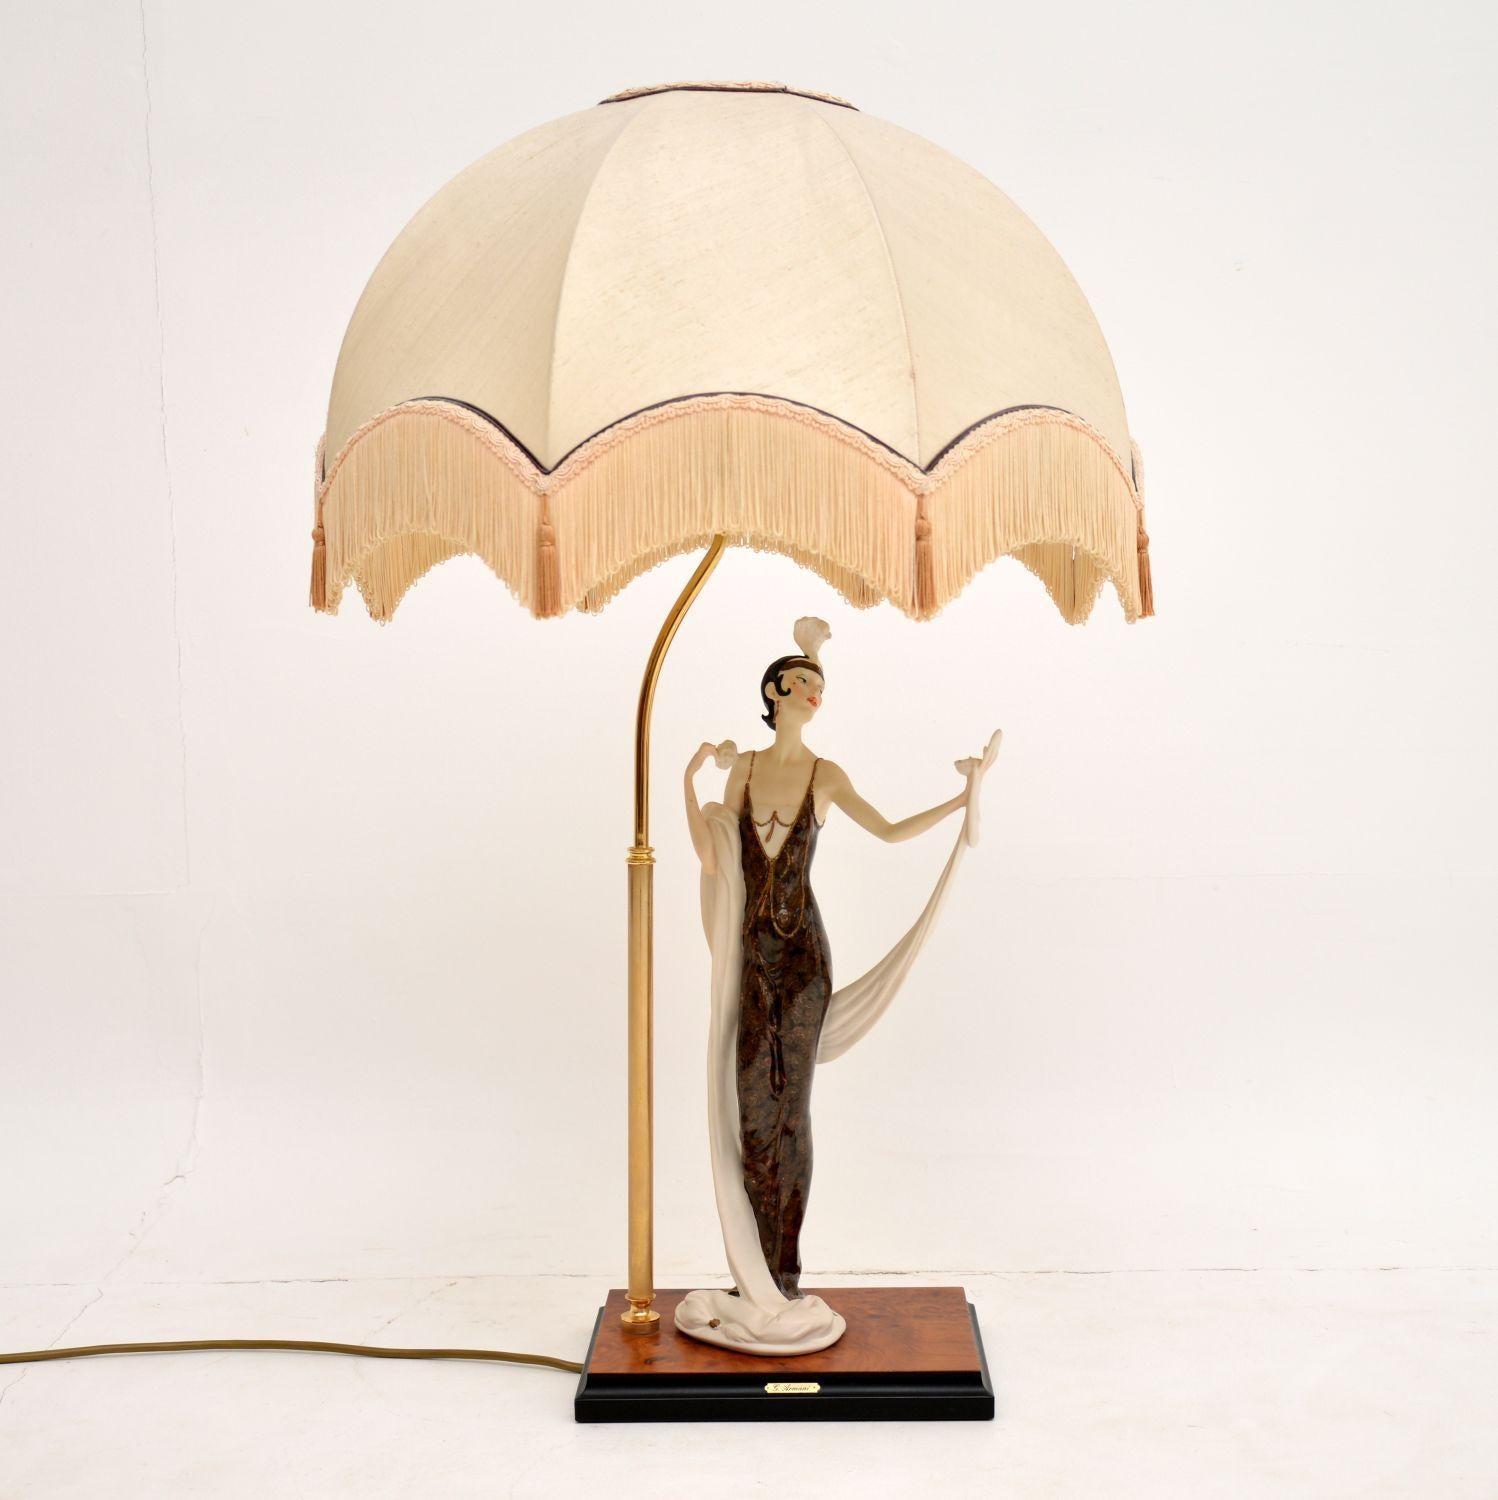 A stunning and quite large vintage porcelain Capodimonte table lamp, by the famous Italian artist Giuseppe Armani. This was issued in 1987, and this particular lamp was made in 1992.

It depicts an Art Deco era lady looking into a vanity mirror,